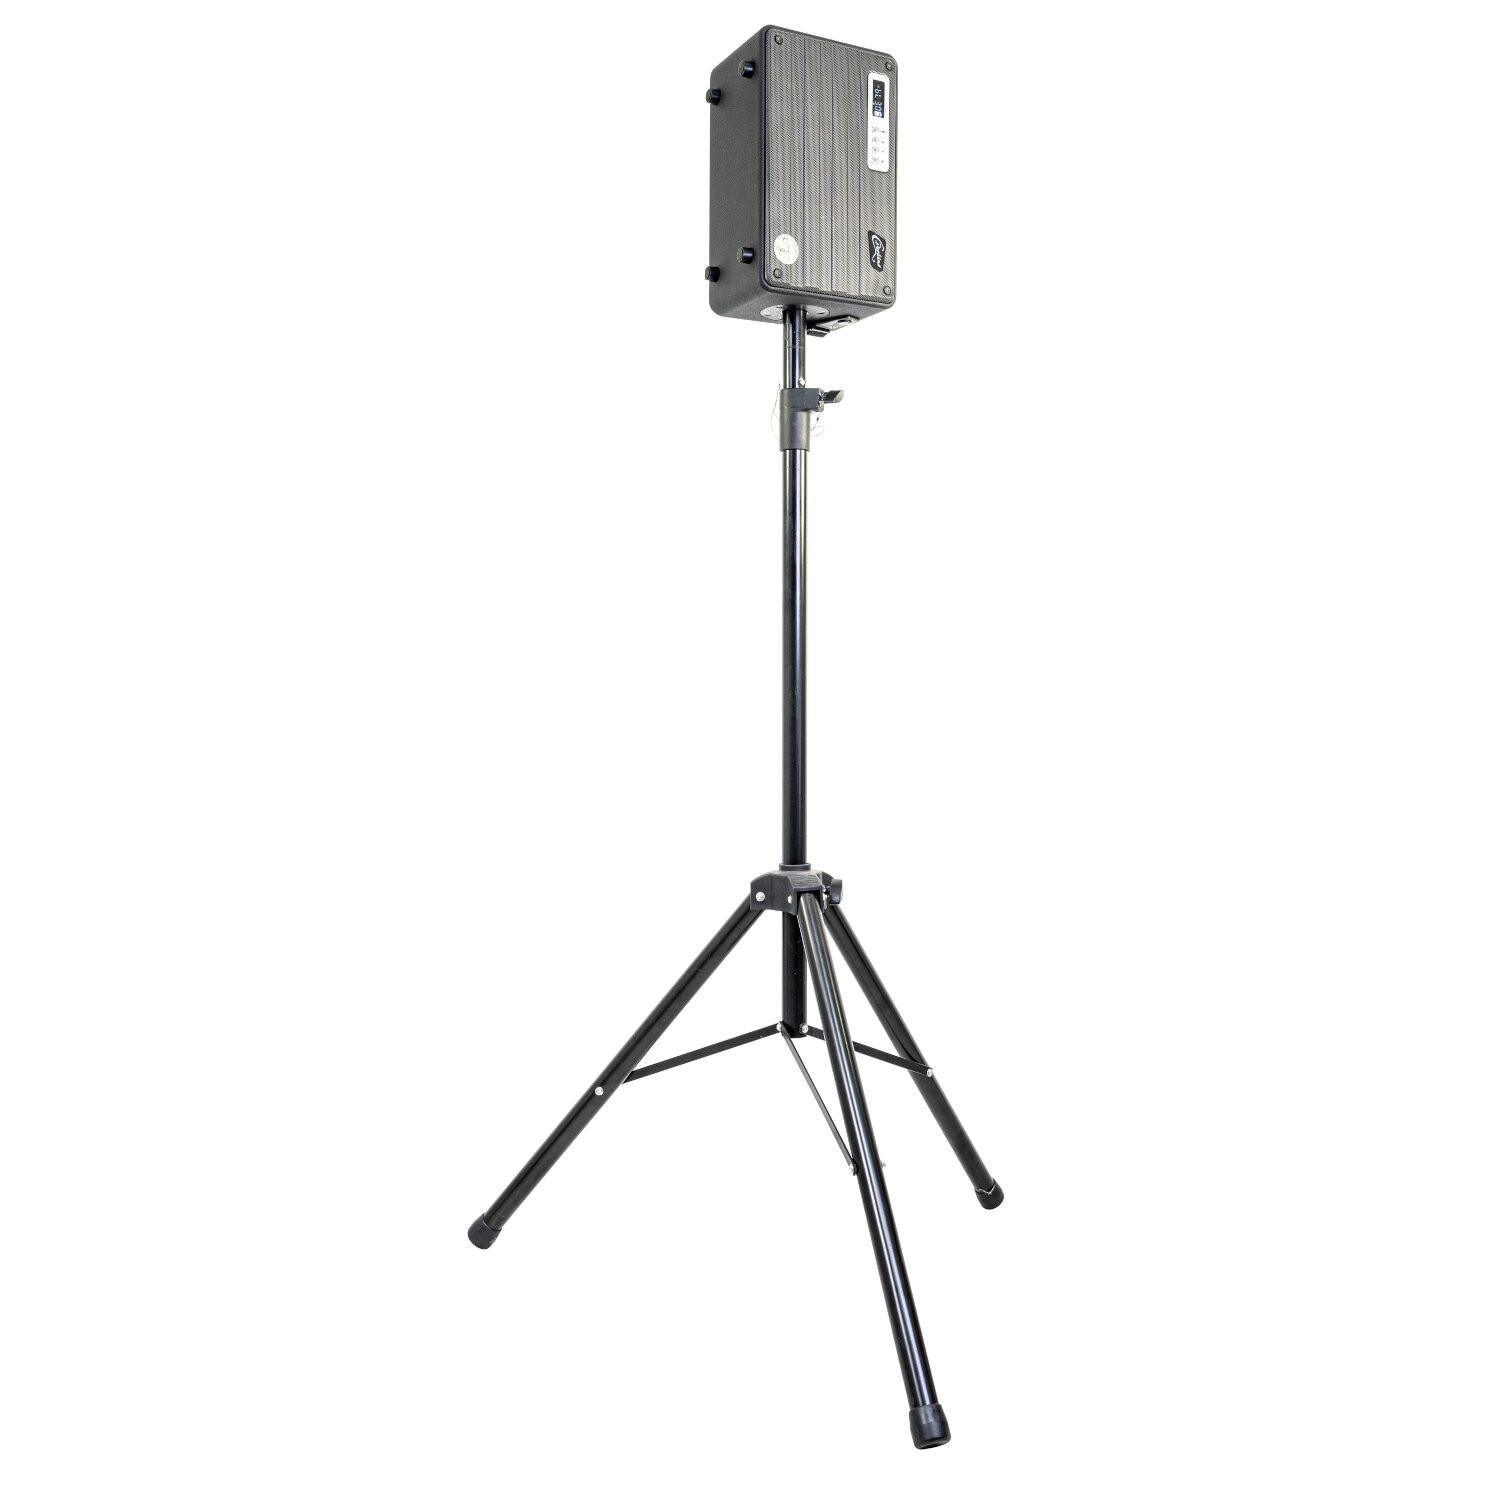 CPerkins Roady FL Portable Combo PA System with UHF Microphone - DY Pro Audio